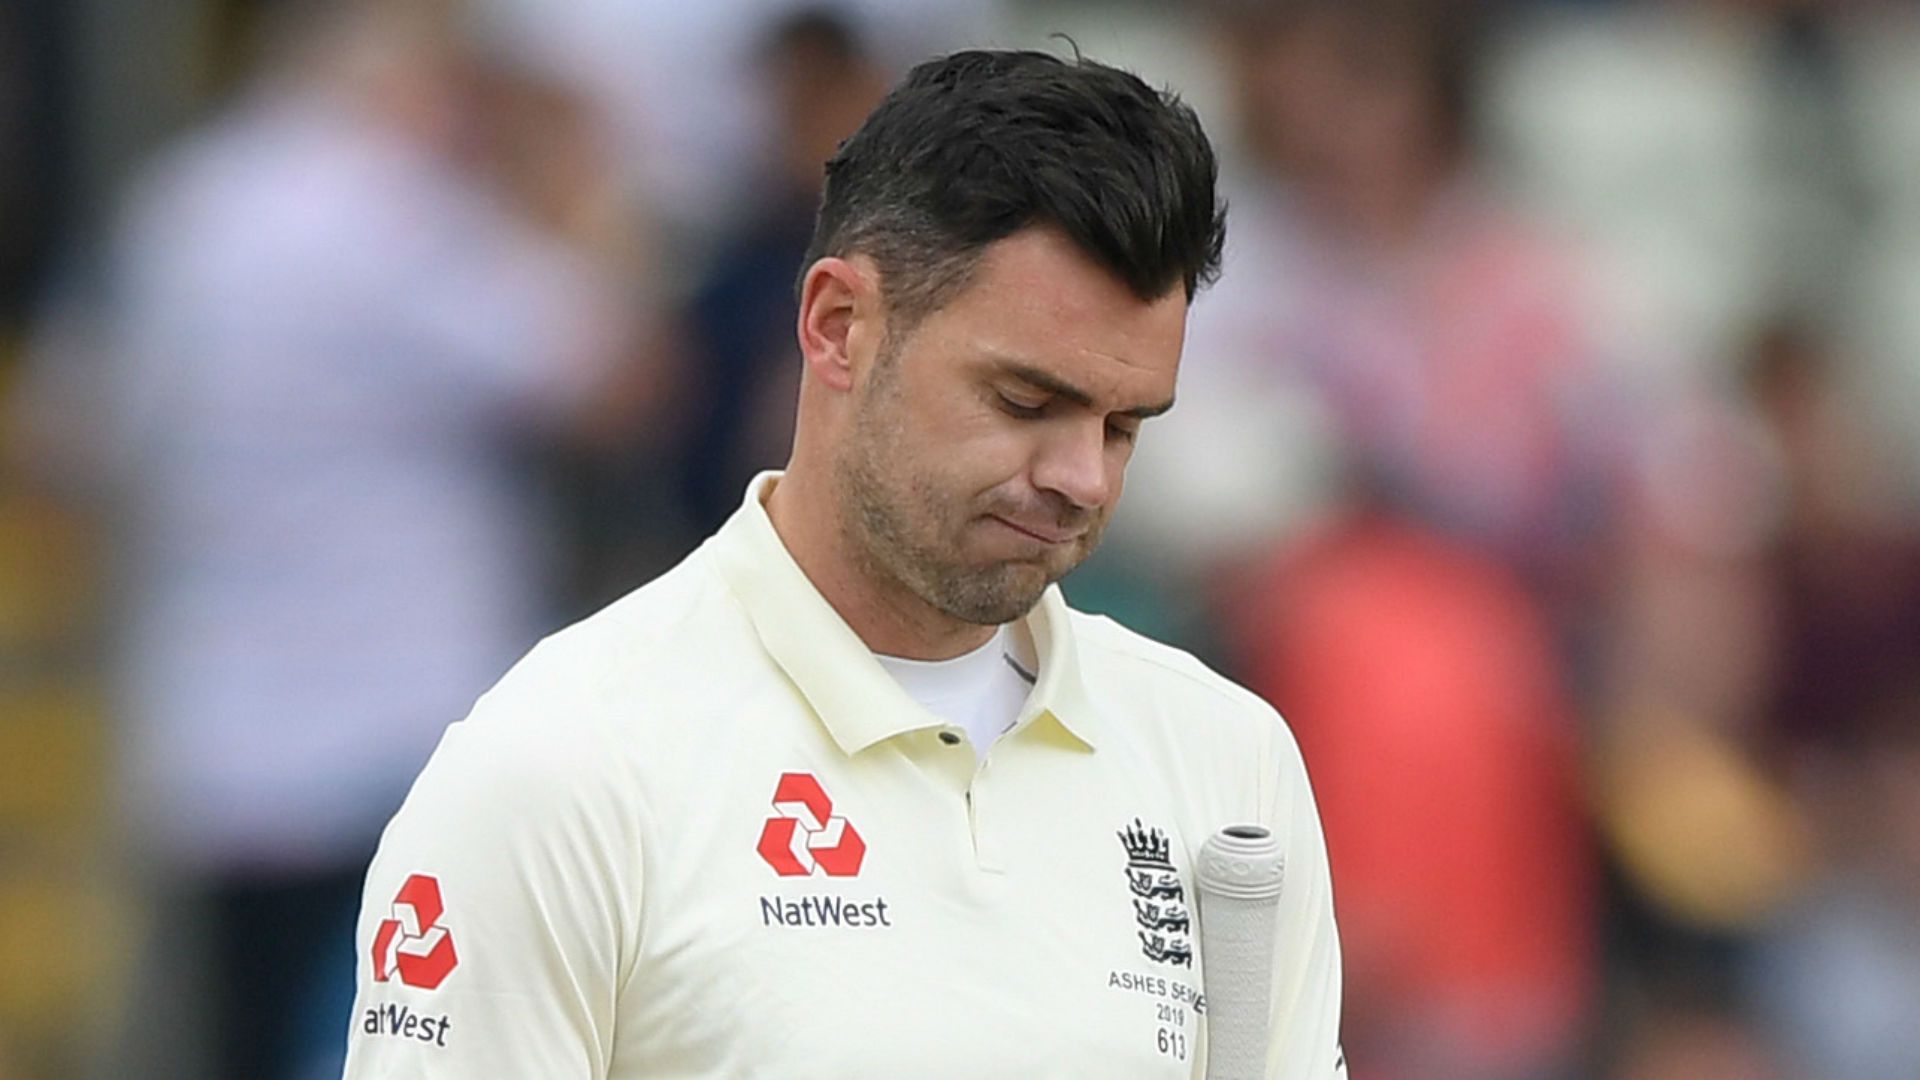 Ashes 2019: England's James Anderson out of second Test against